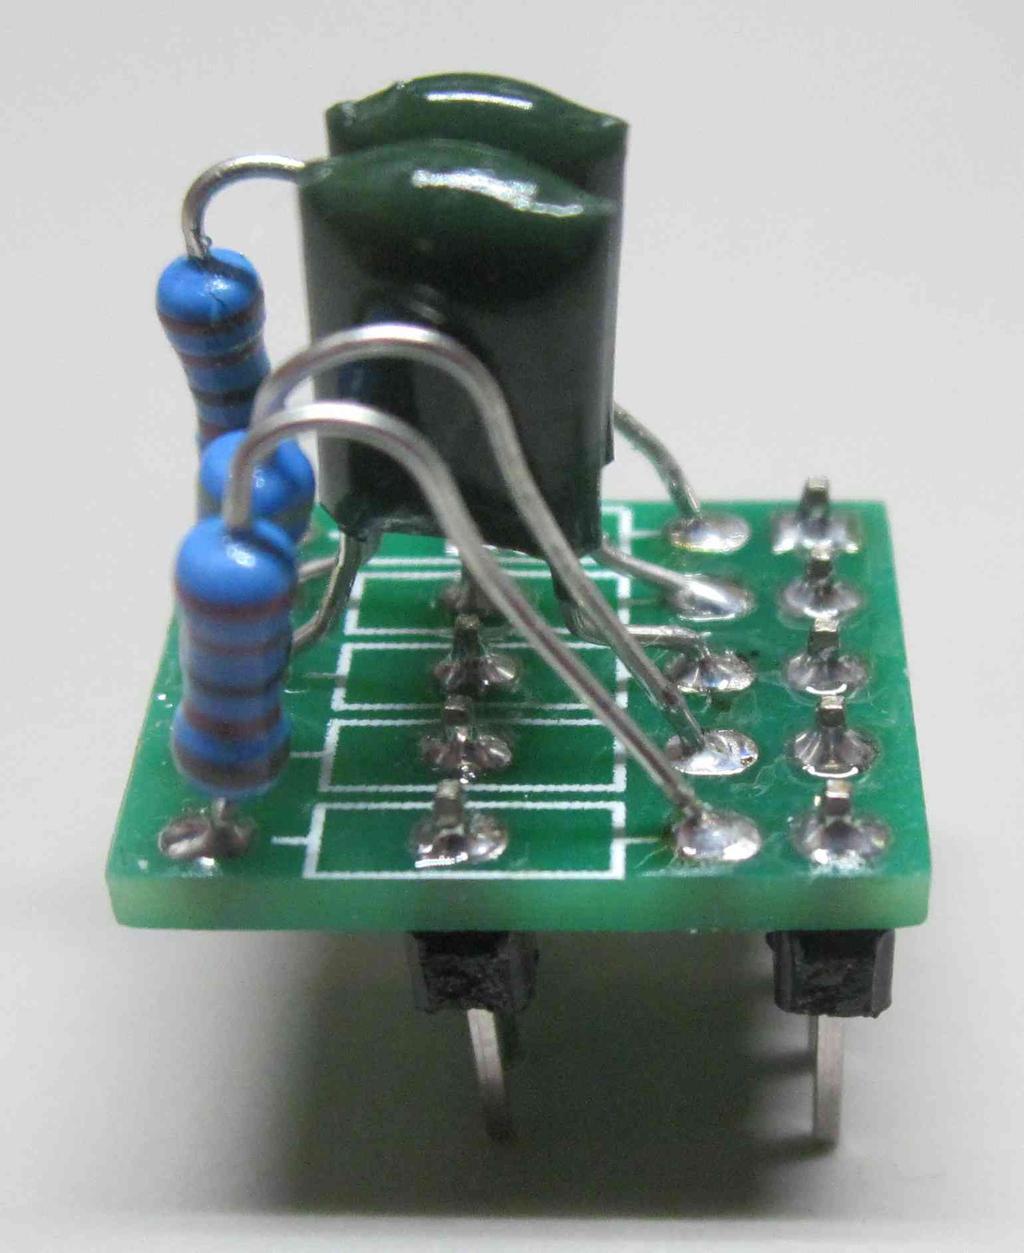 Soldering from the top side may be easier than between the header rows on the bottom.